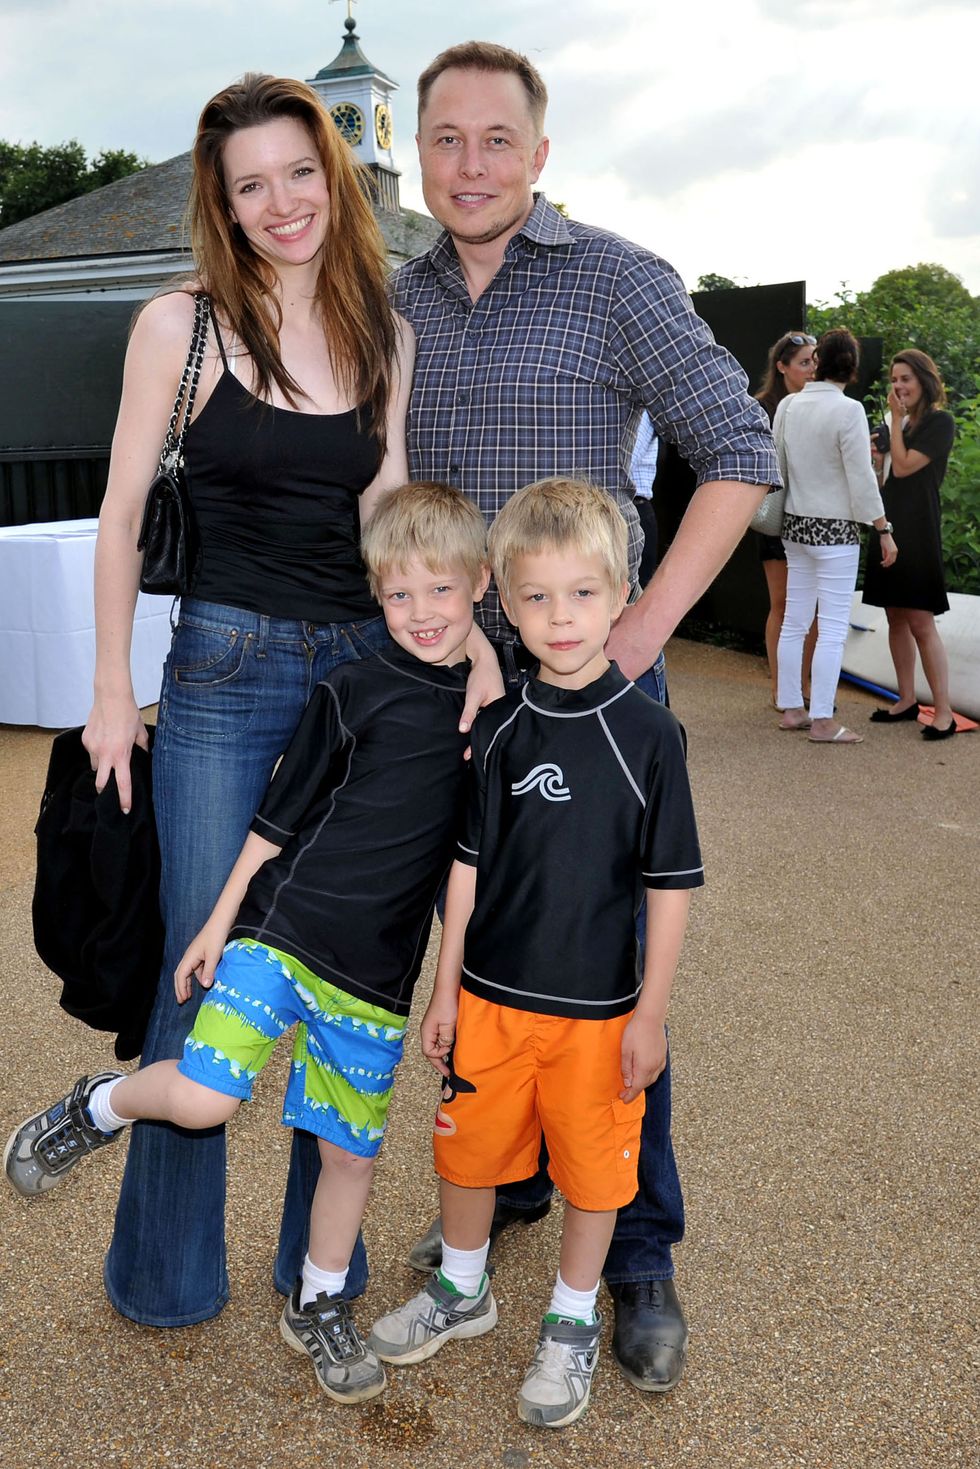 mandatory credit photo by alan davidsonshutterstock 7526065bd
chucs take a dip in the serpentine in aid of charity water hosted by chucs dive and mountain shop talulah riley with her husband elon musk and stepsons
chucs take a dip in the serpentine in aid of charity water hosted by chucs dive and mountain shop   04 jul 2011